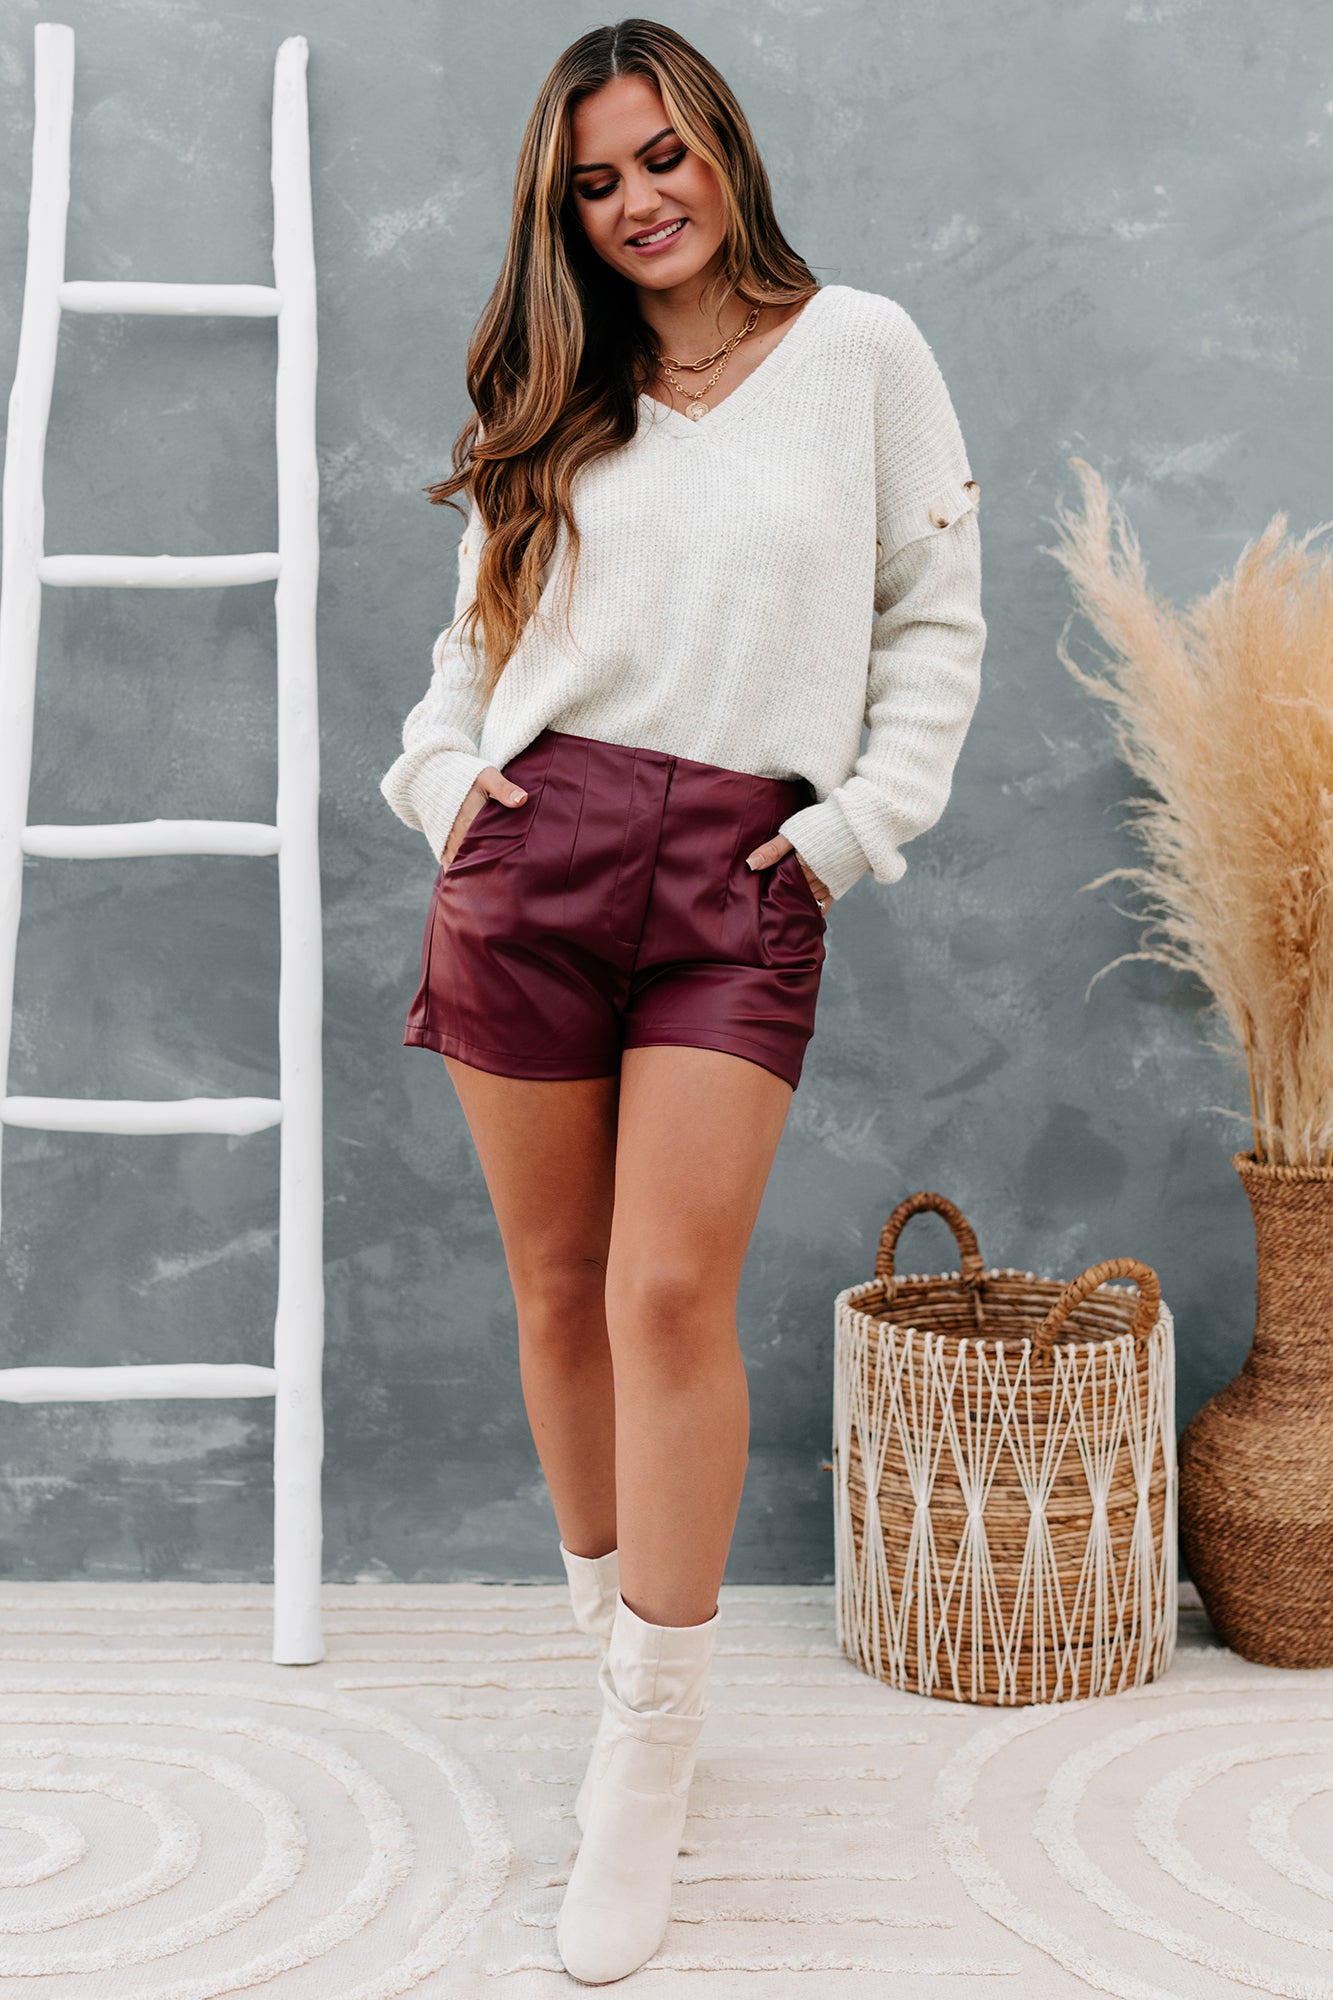 23 Best Brown shorts outfit ideas